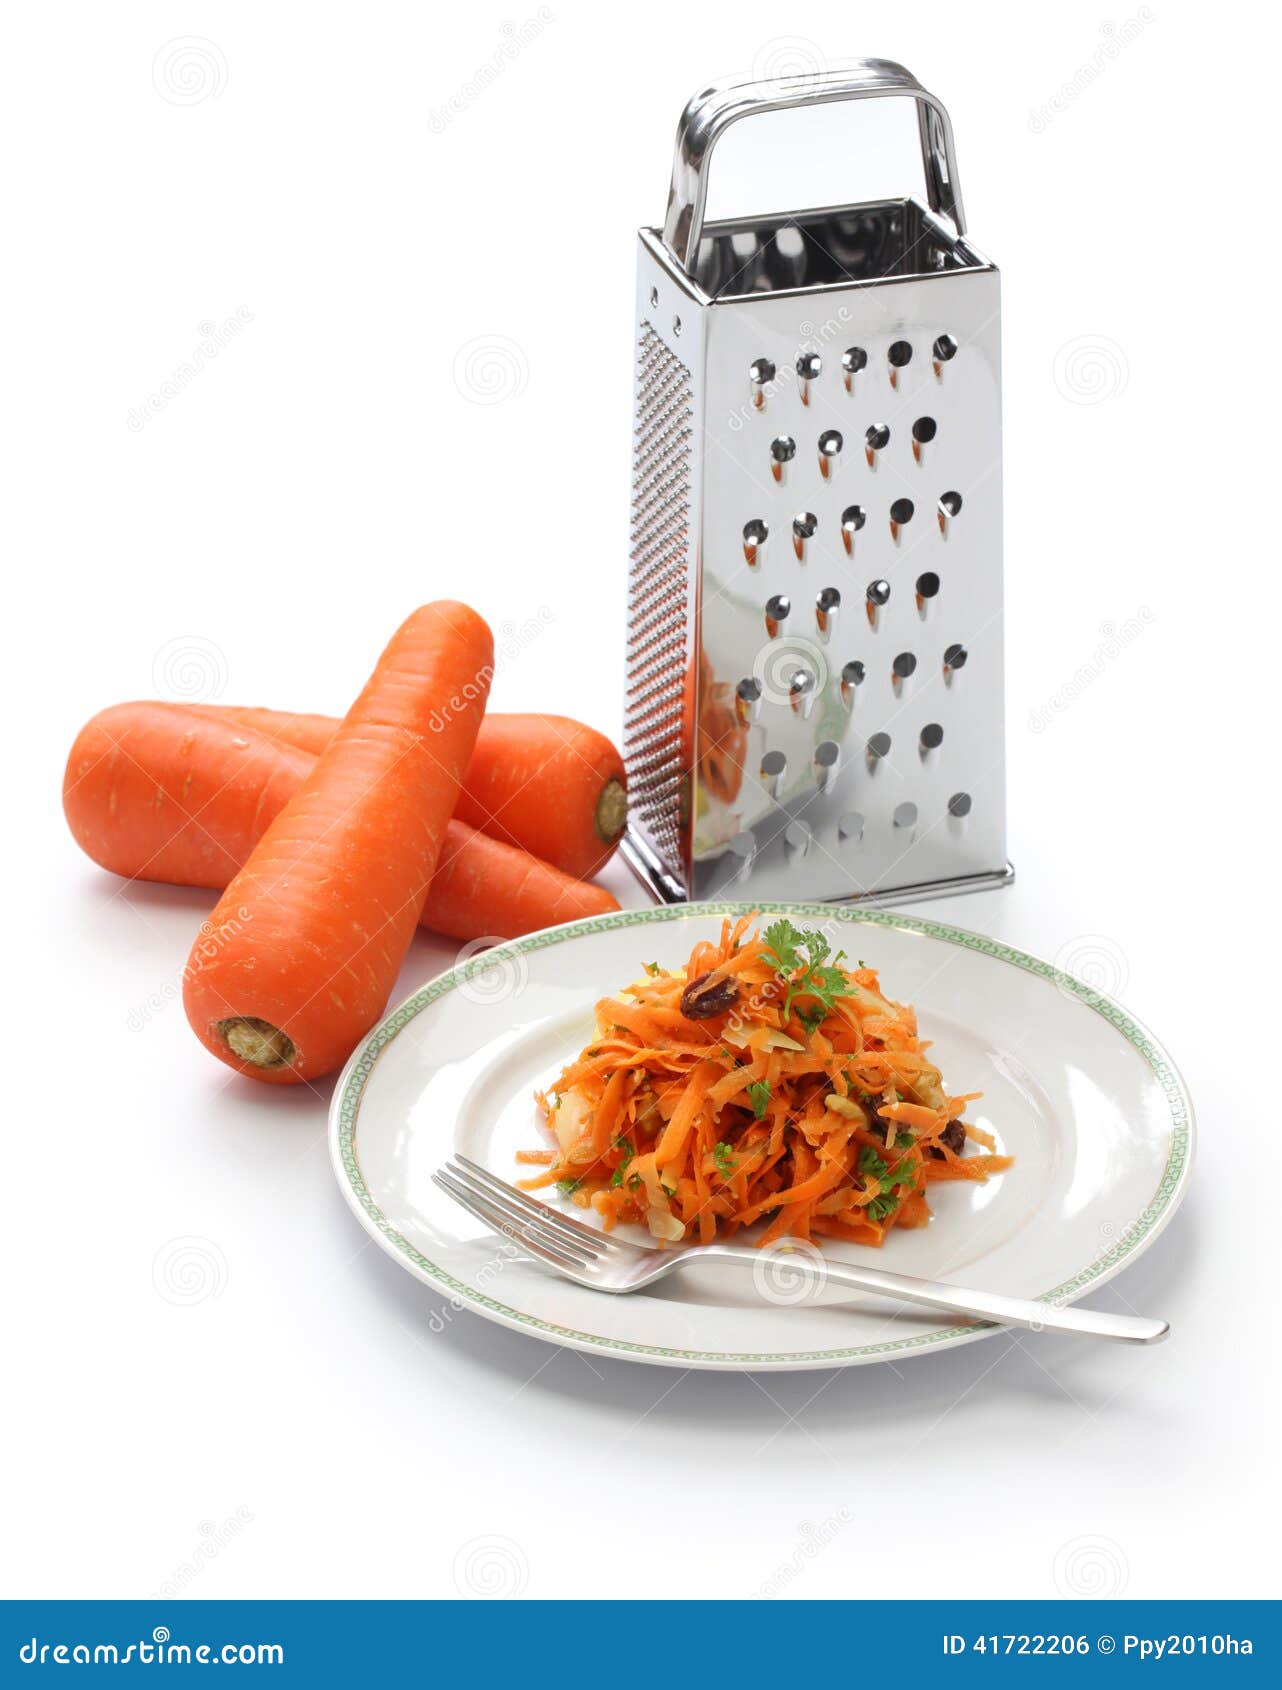 https://thumbs.dreamstime.com/z/grated-carrot-salad-grater-carottes-rapees-white-background-41722206.jpg